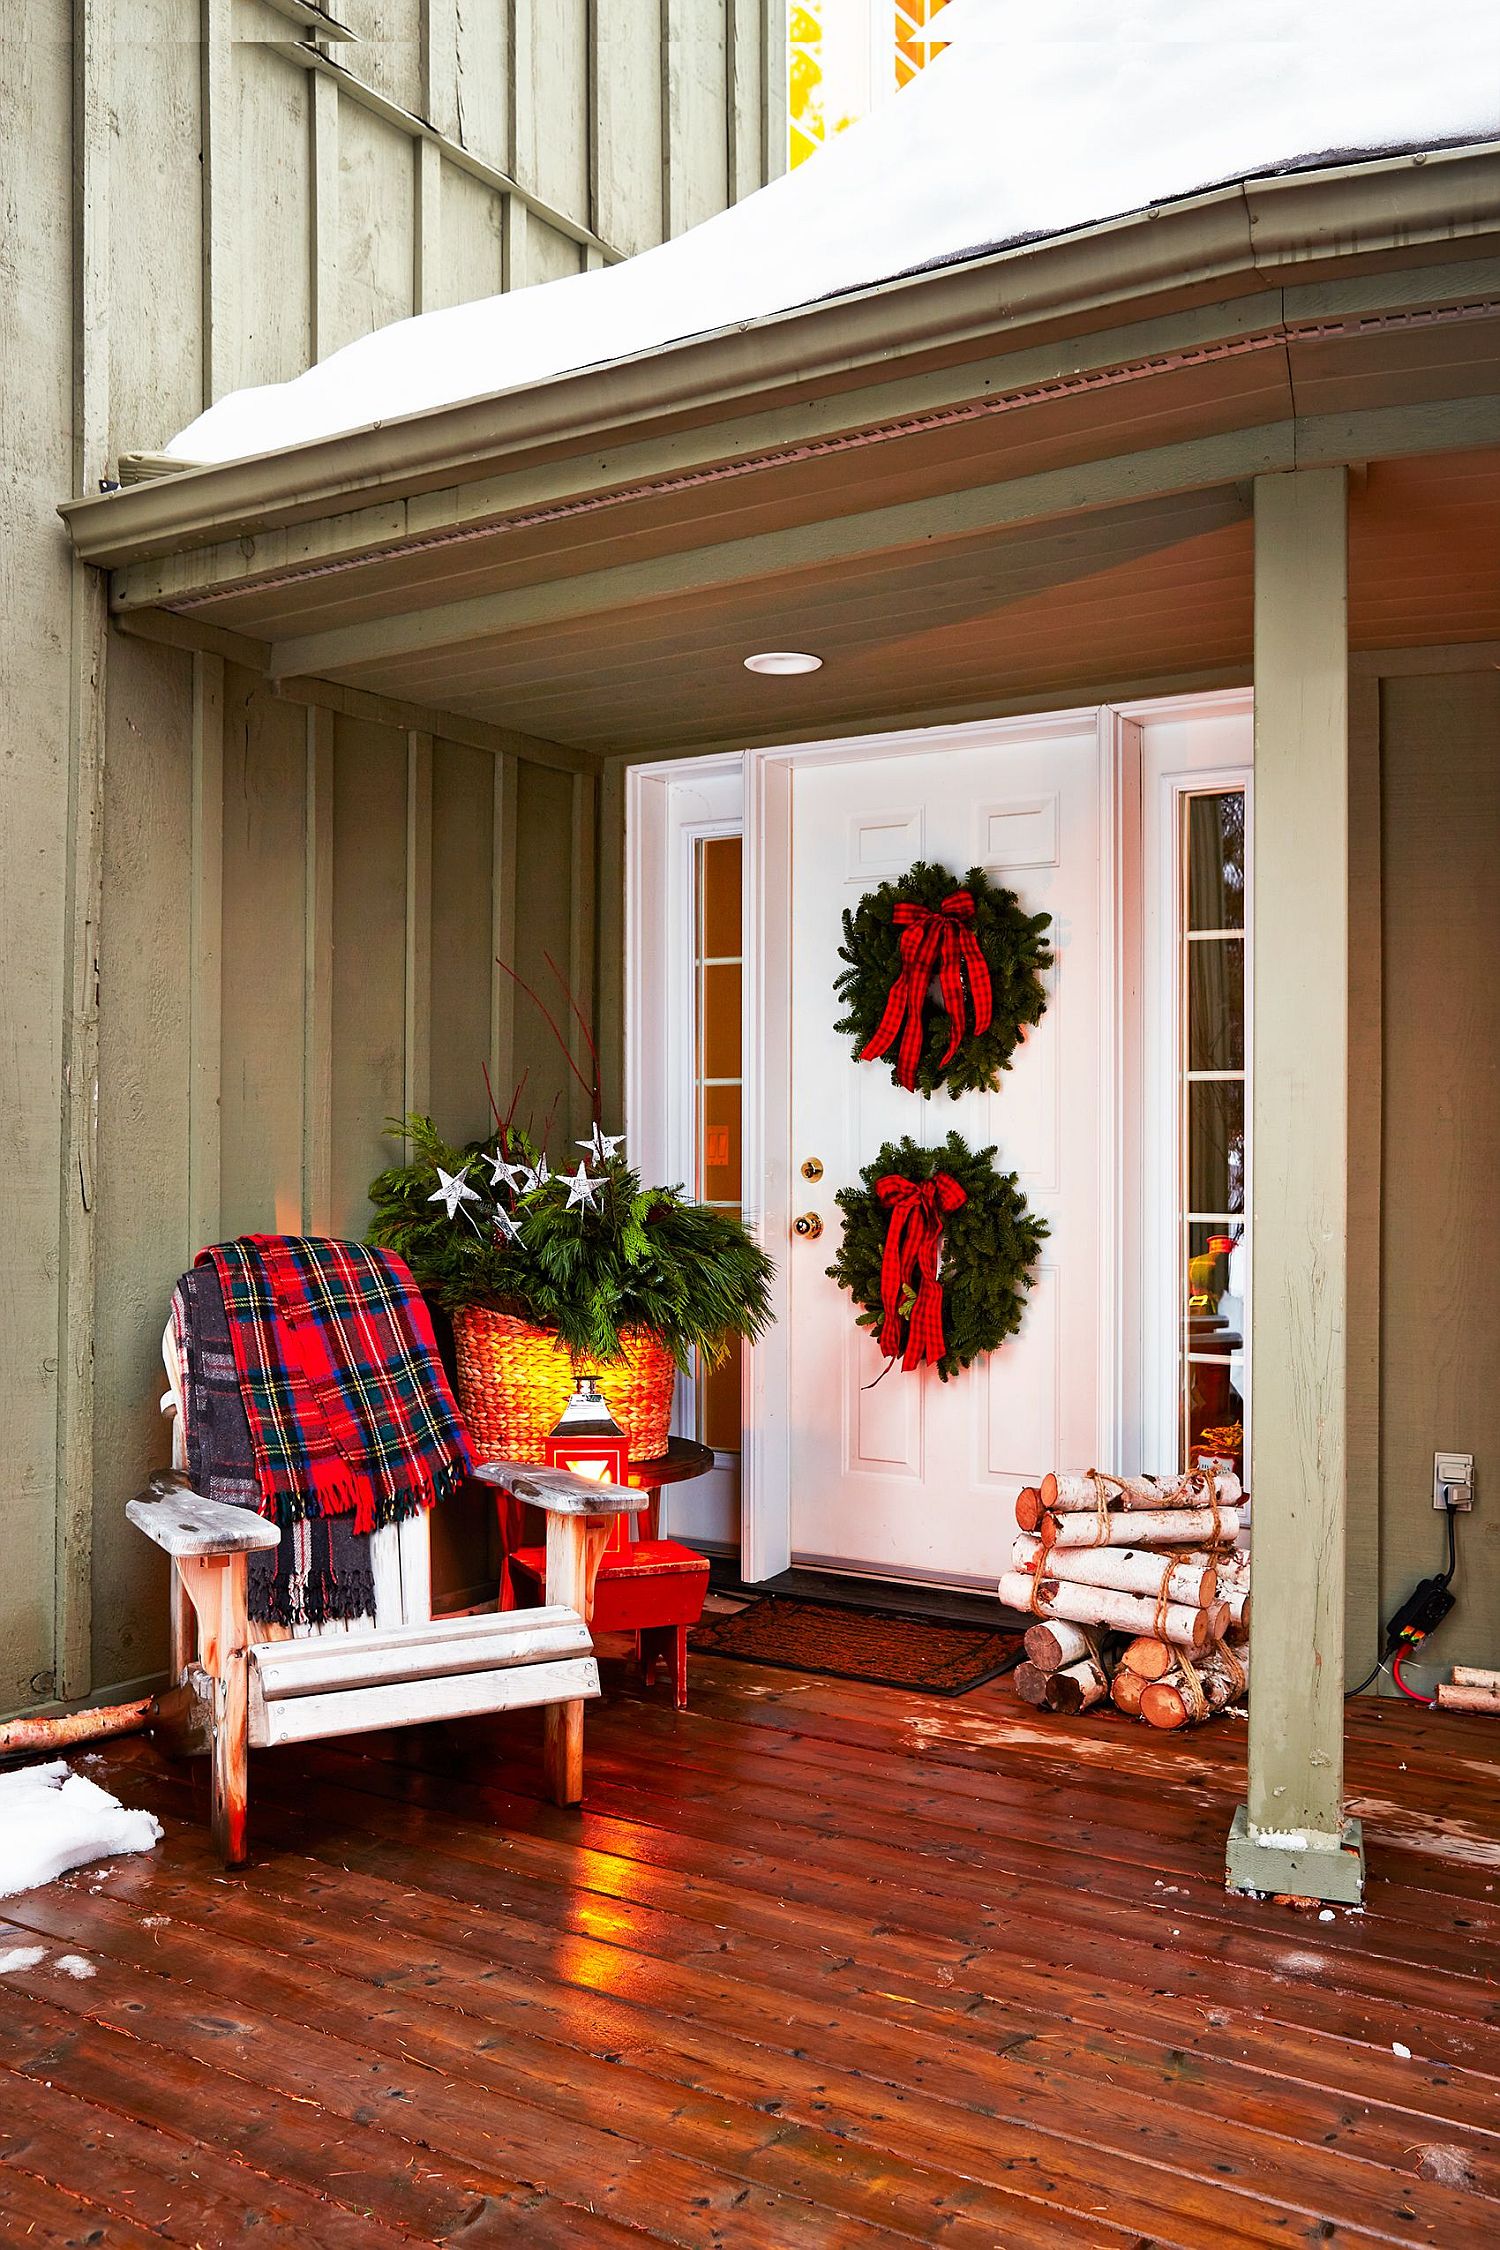 Try-out-what-works-best-in-your-own-front-porch-depending-on-scale-and-size